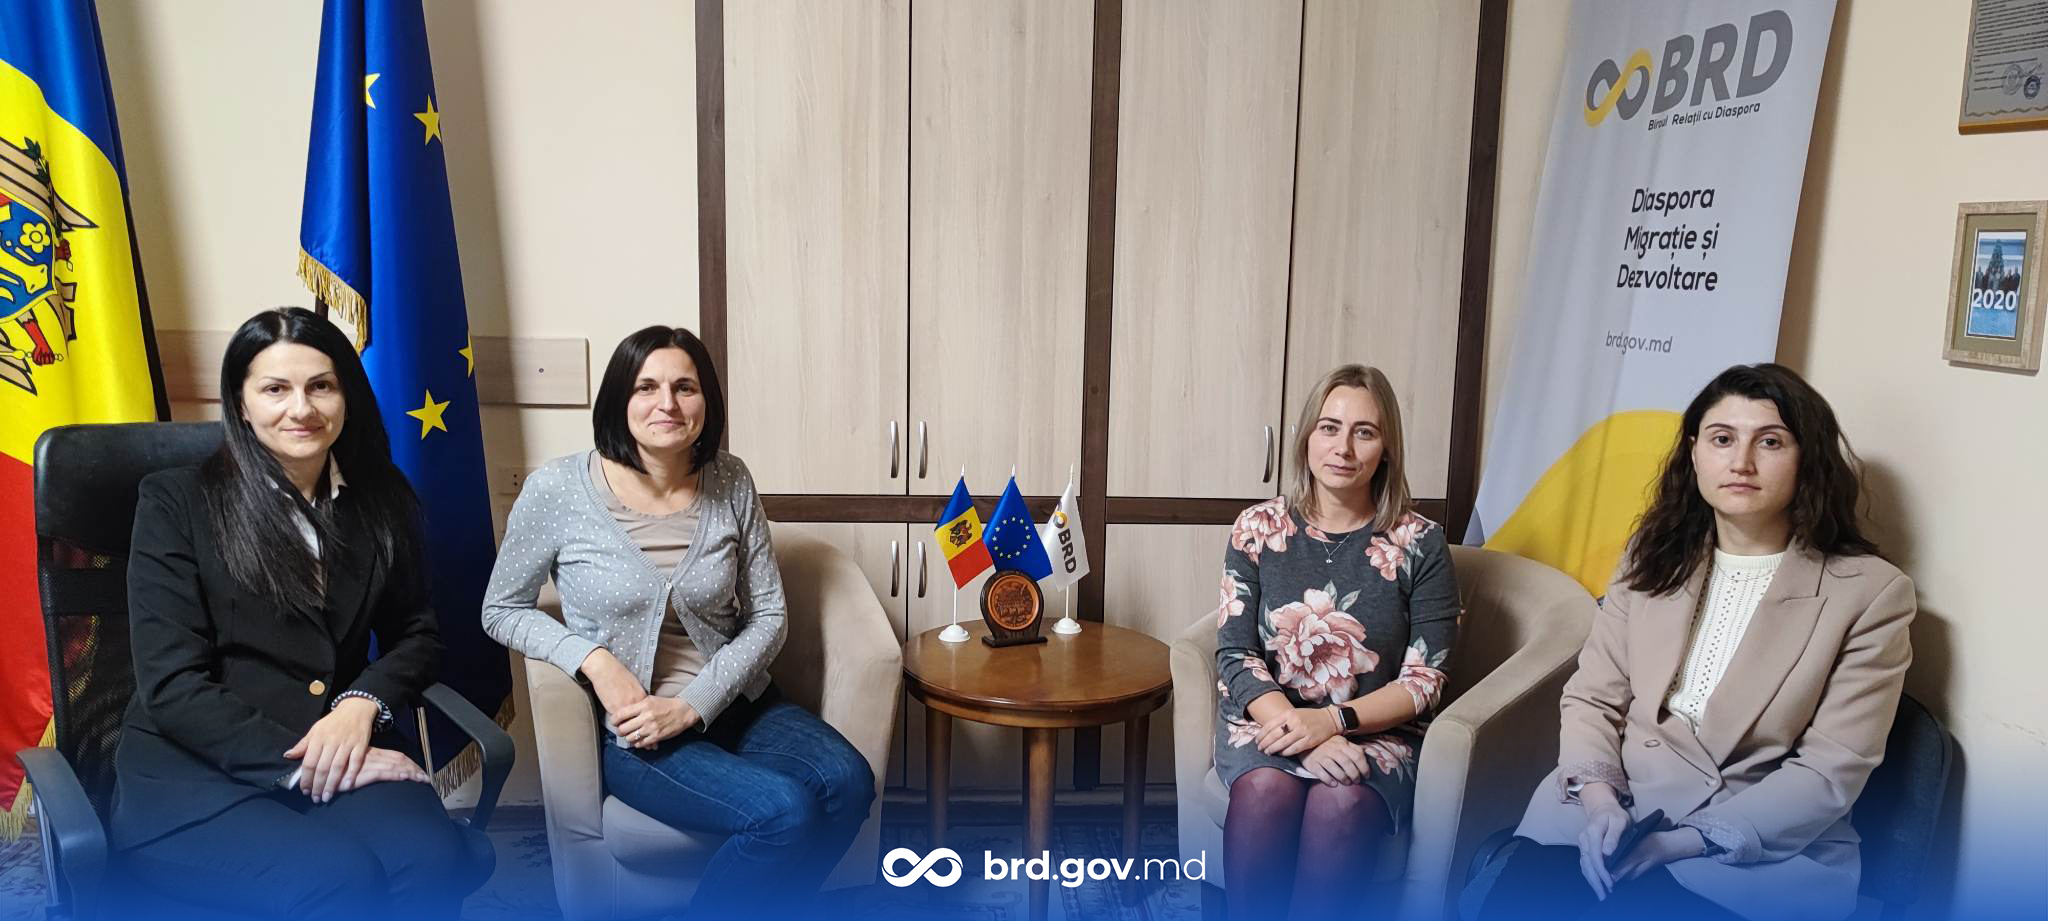 Adriana Rotaru from Belgium and Dorina Baltag from the Kingdom of the Netherlands undertook a documentary visit to the Republic of Moldova